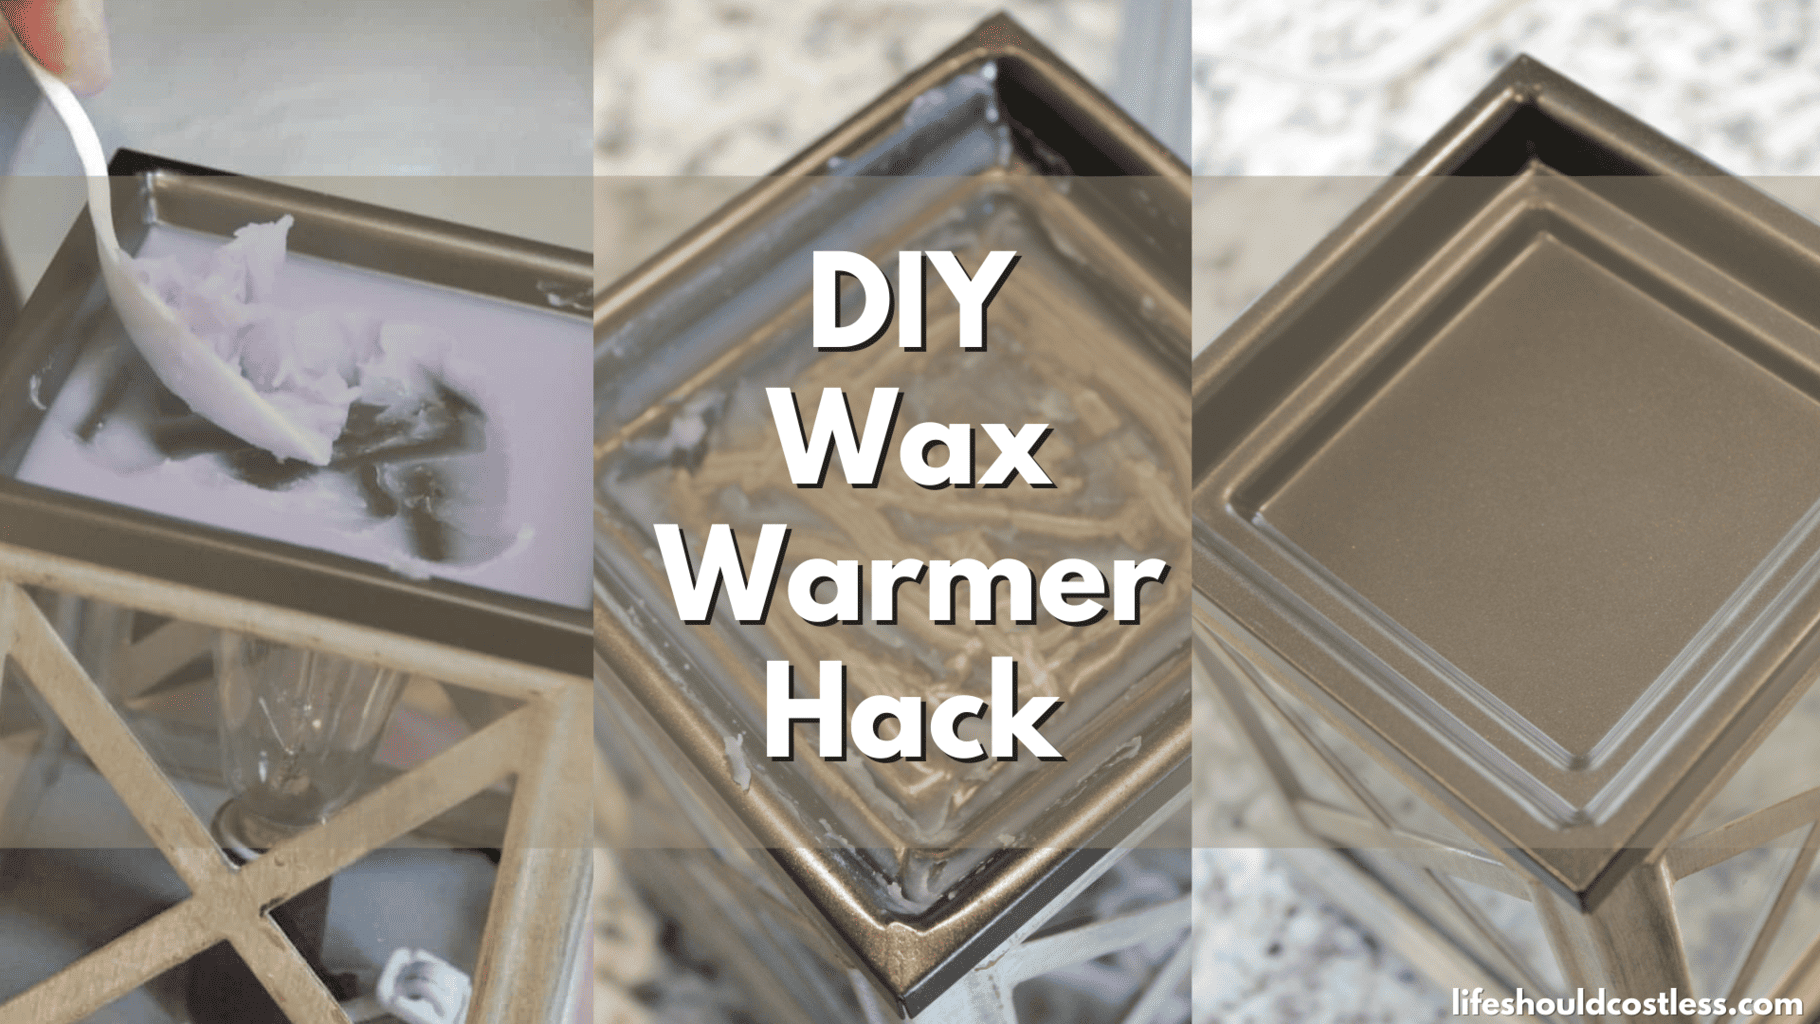 How to Clean a Wax Warmer